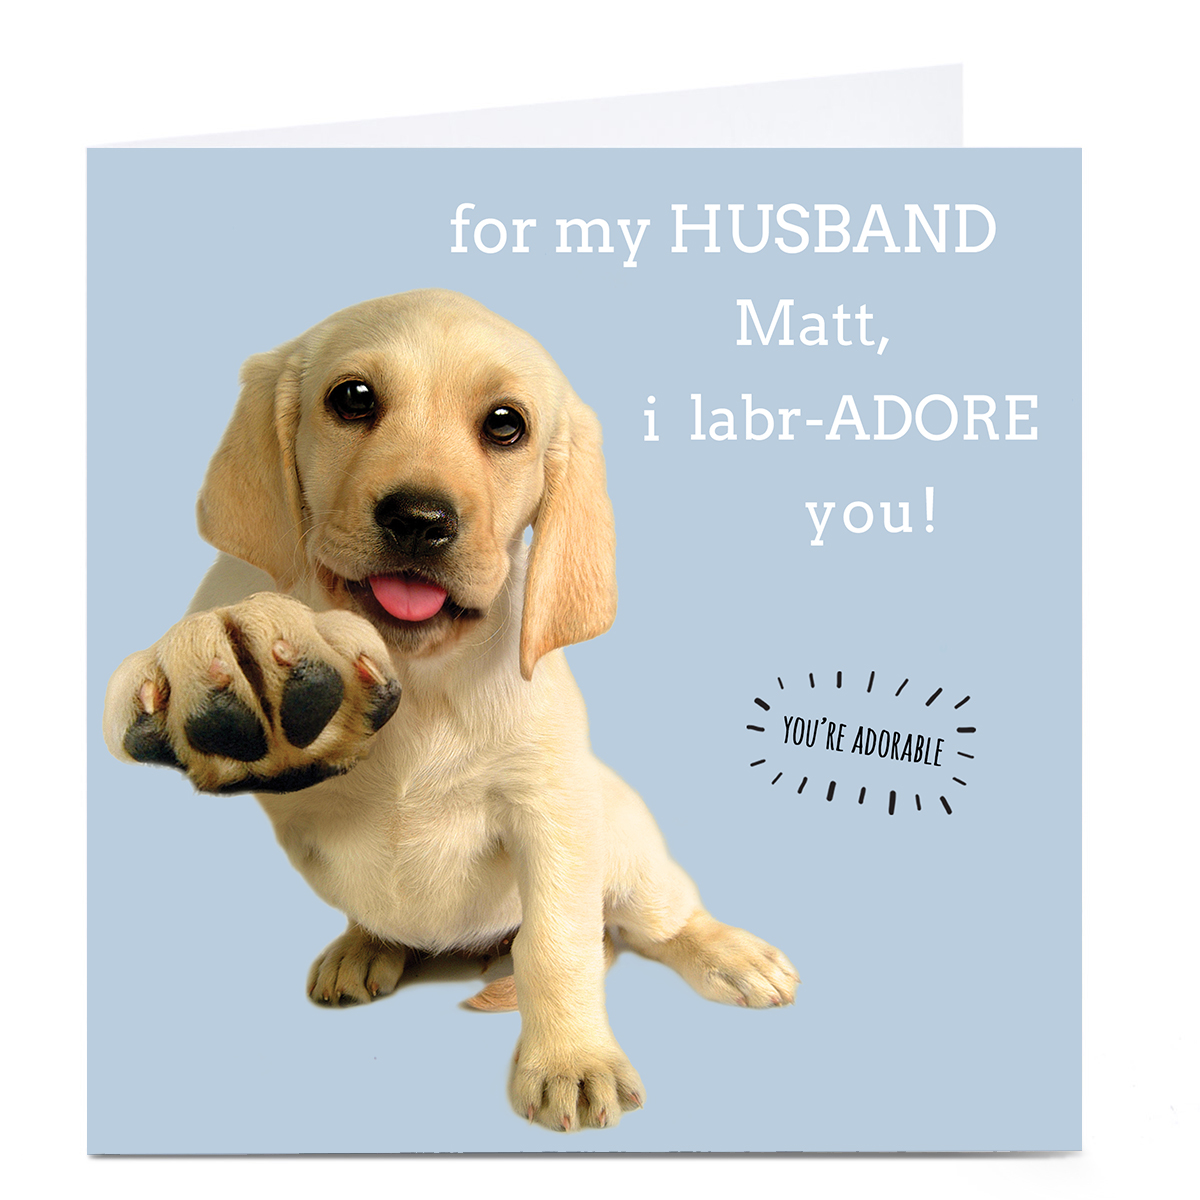 Personalised Card - Husband I Labr-Adore You!